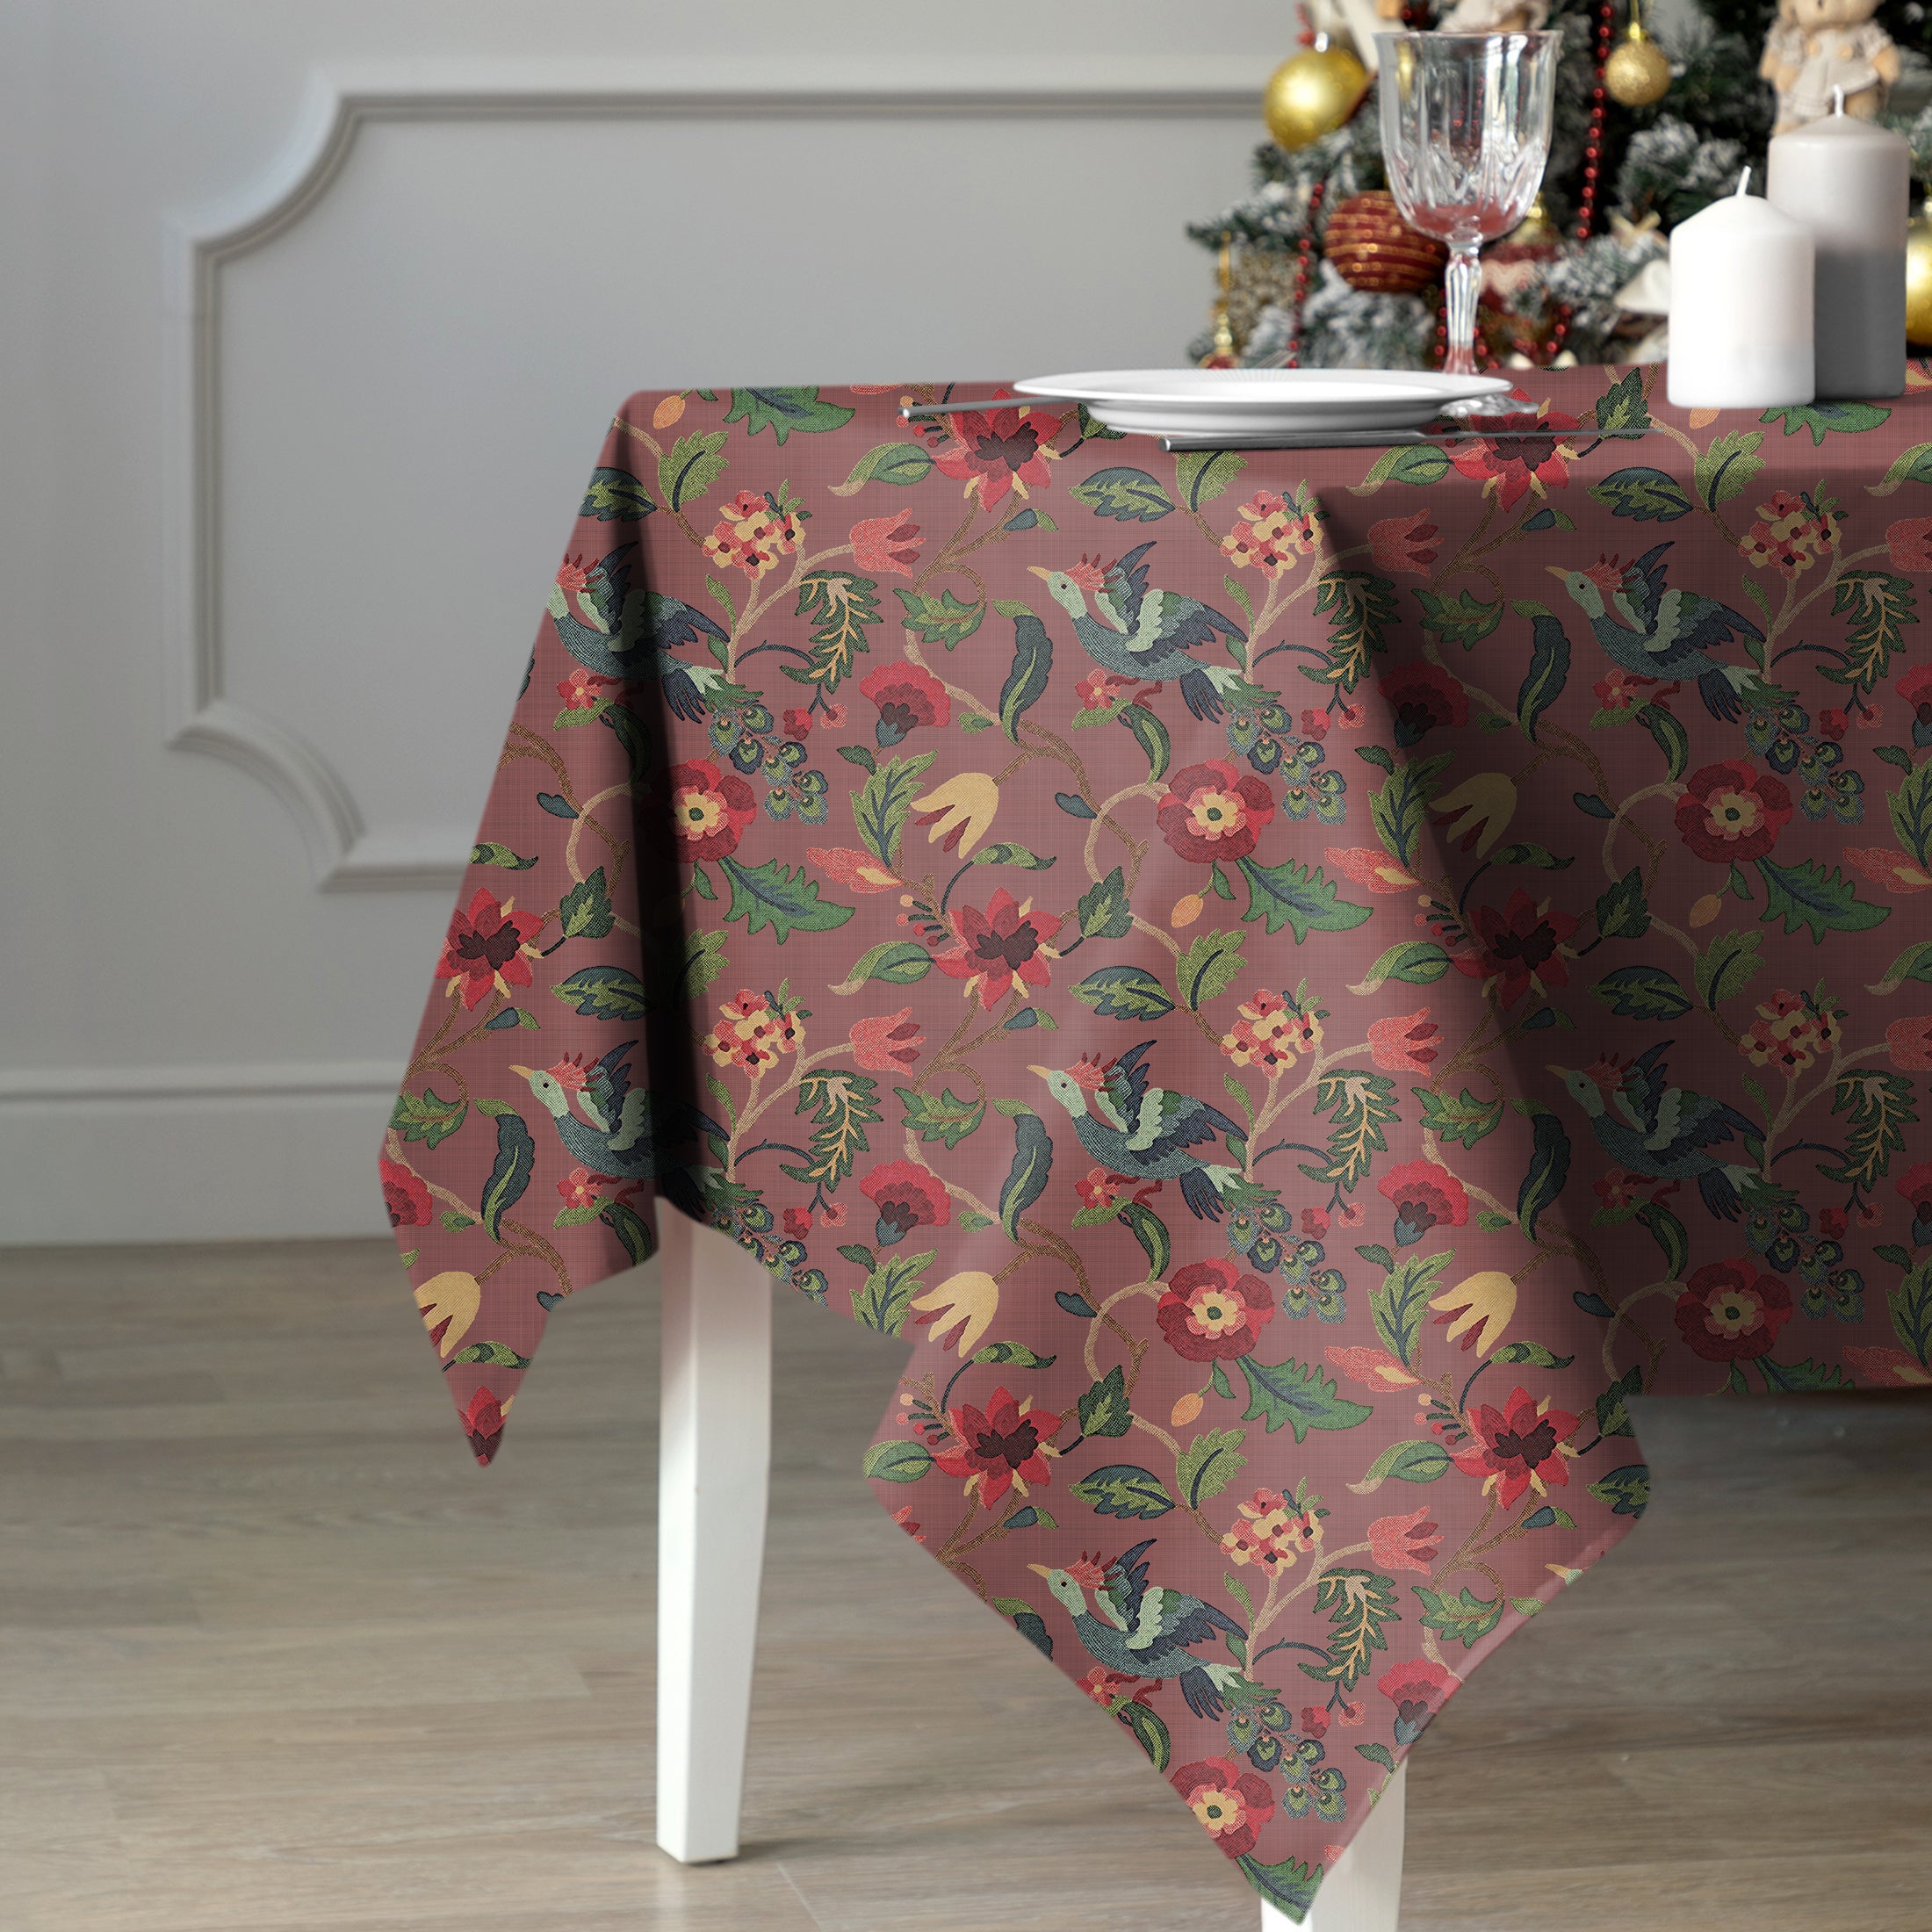 Cabal Mineral 6 Seater Table Cloth